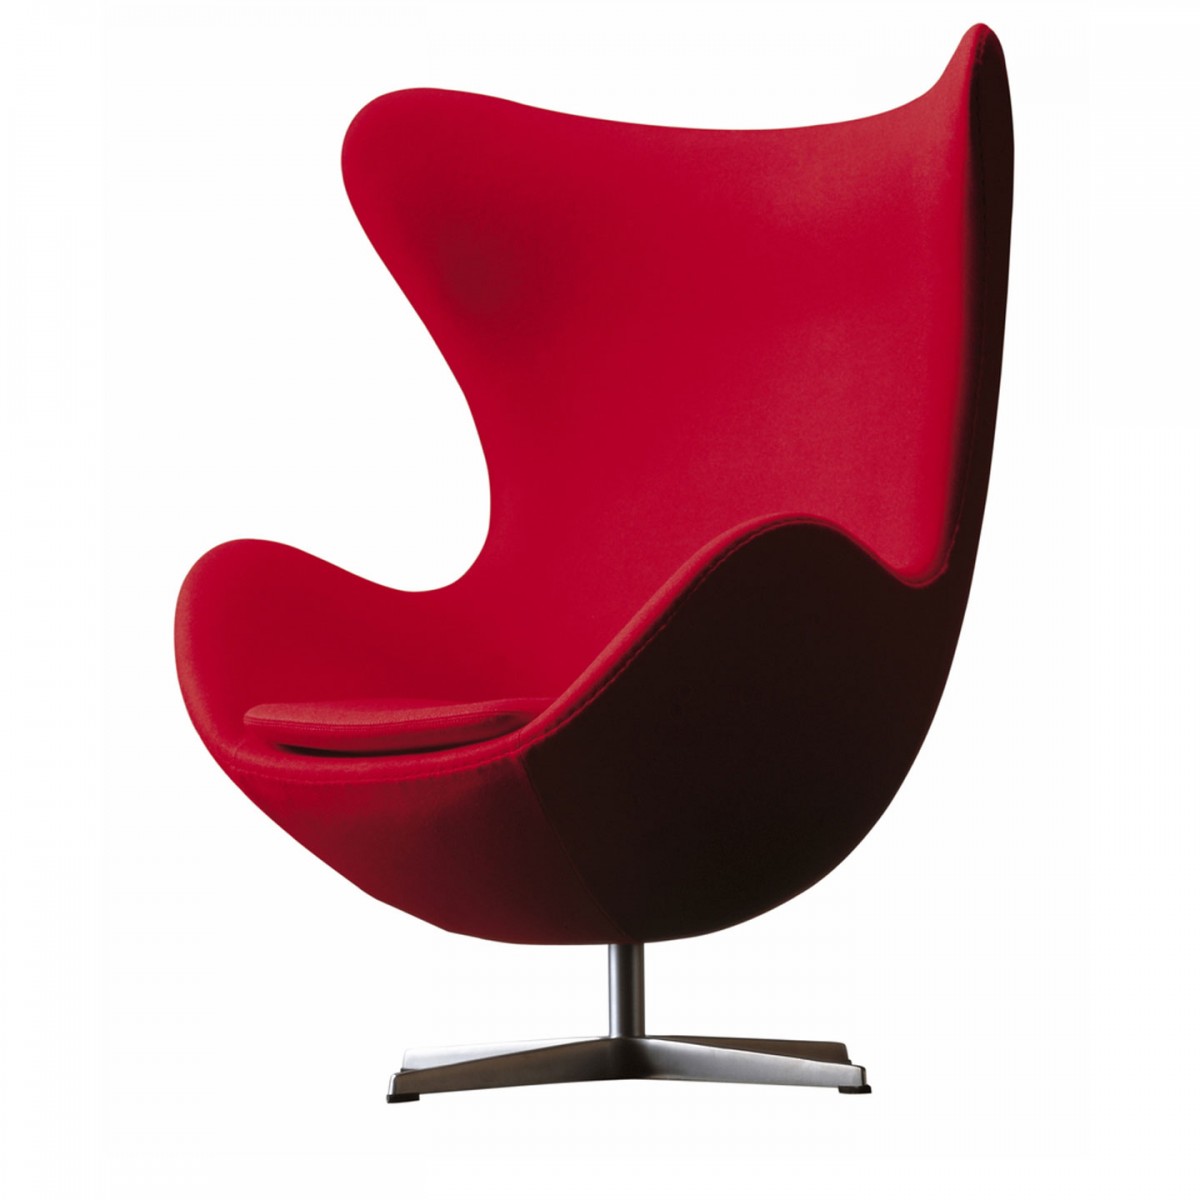 Why The Egg Chair Matters Design Phaidon